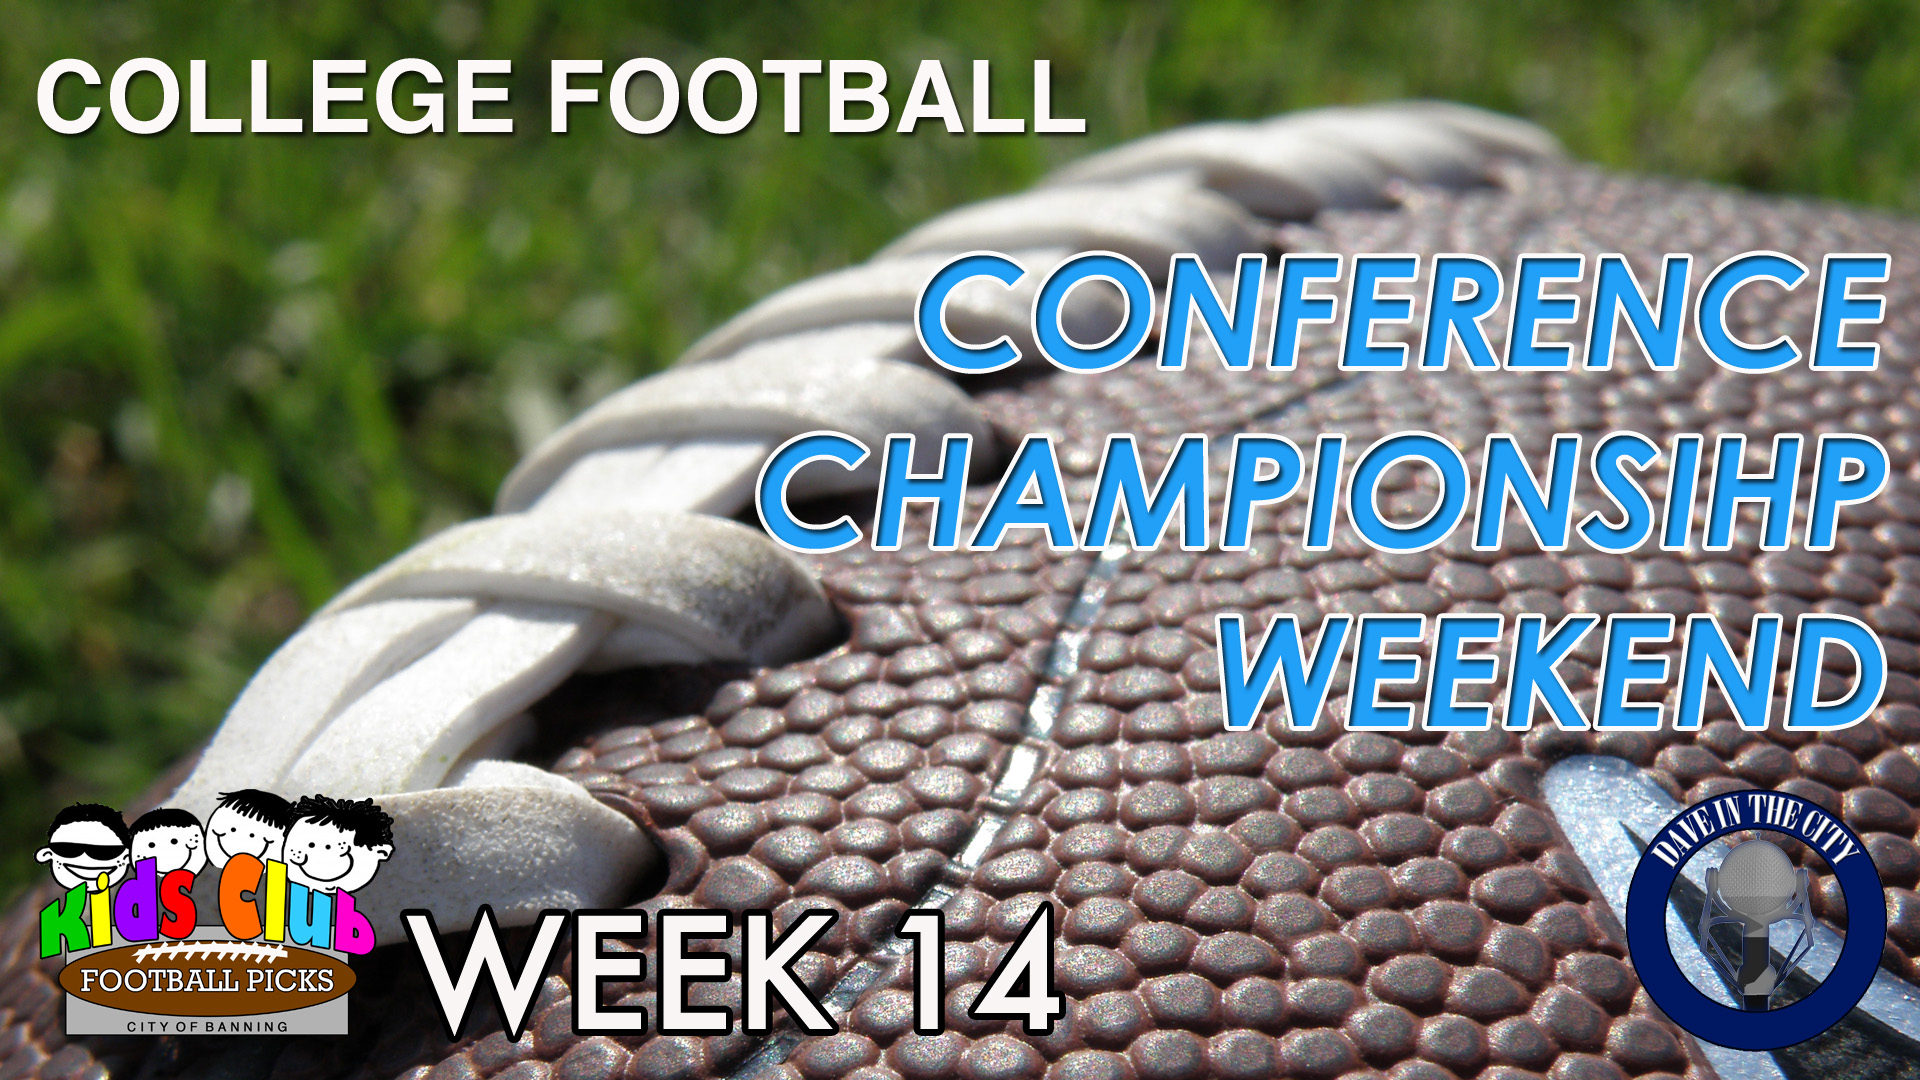 Podcast: NCAA Conference Championship Weekend; Kids Club Picks; NFL; RQ's (12-01-15)